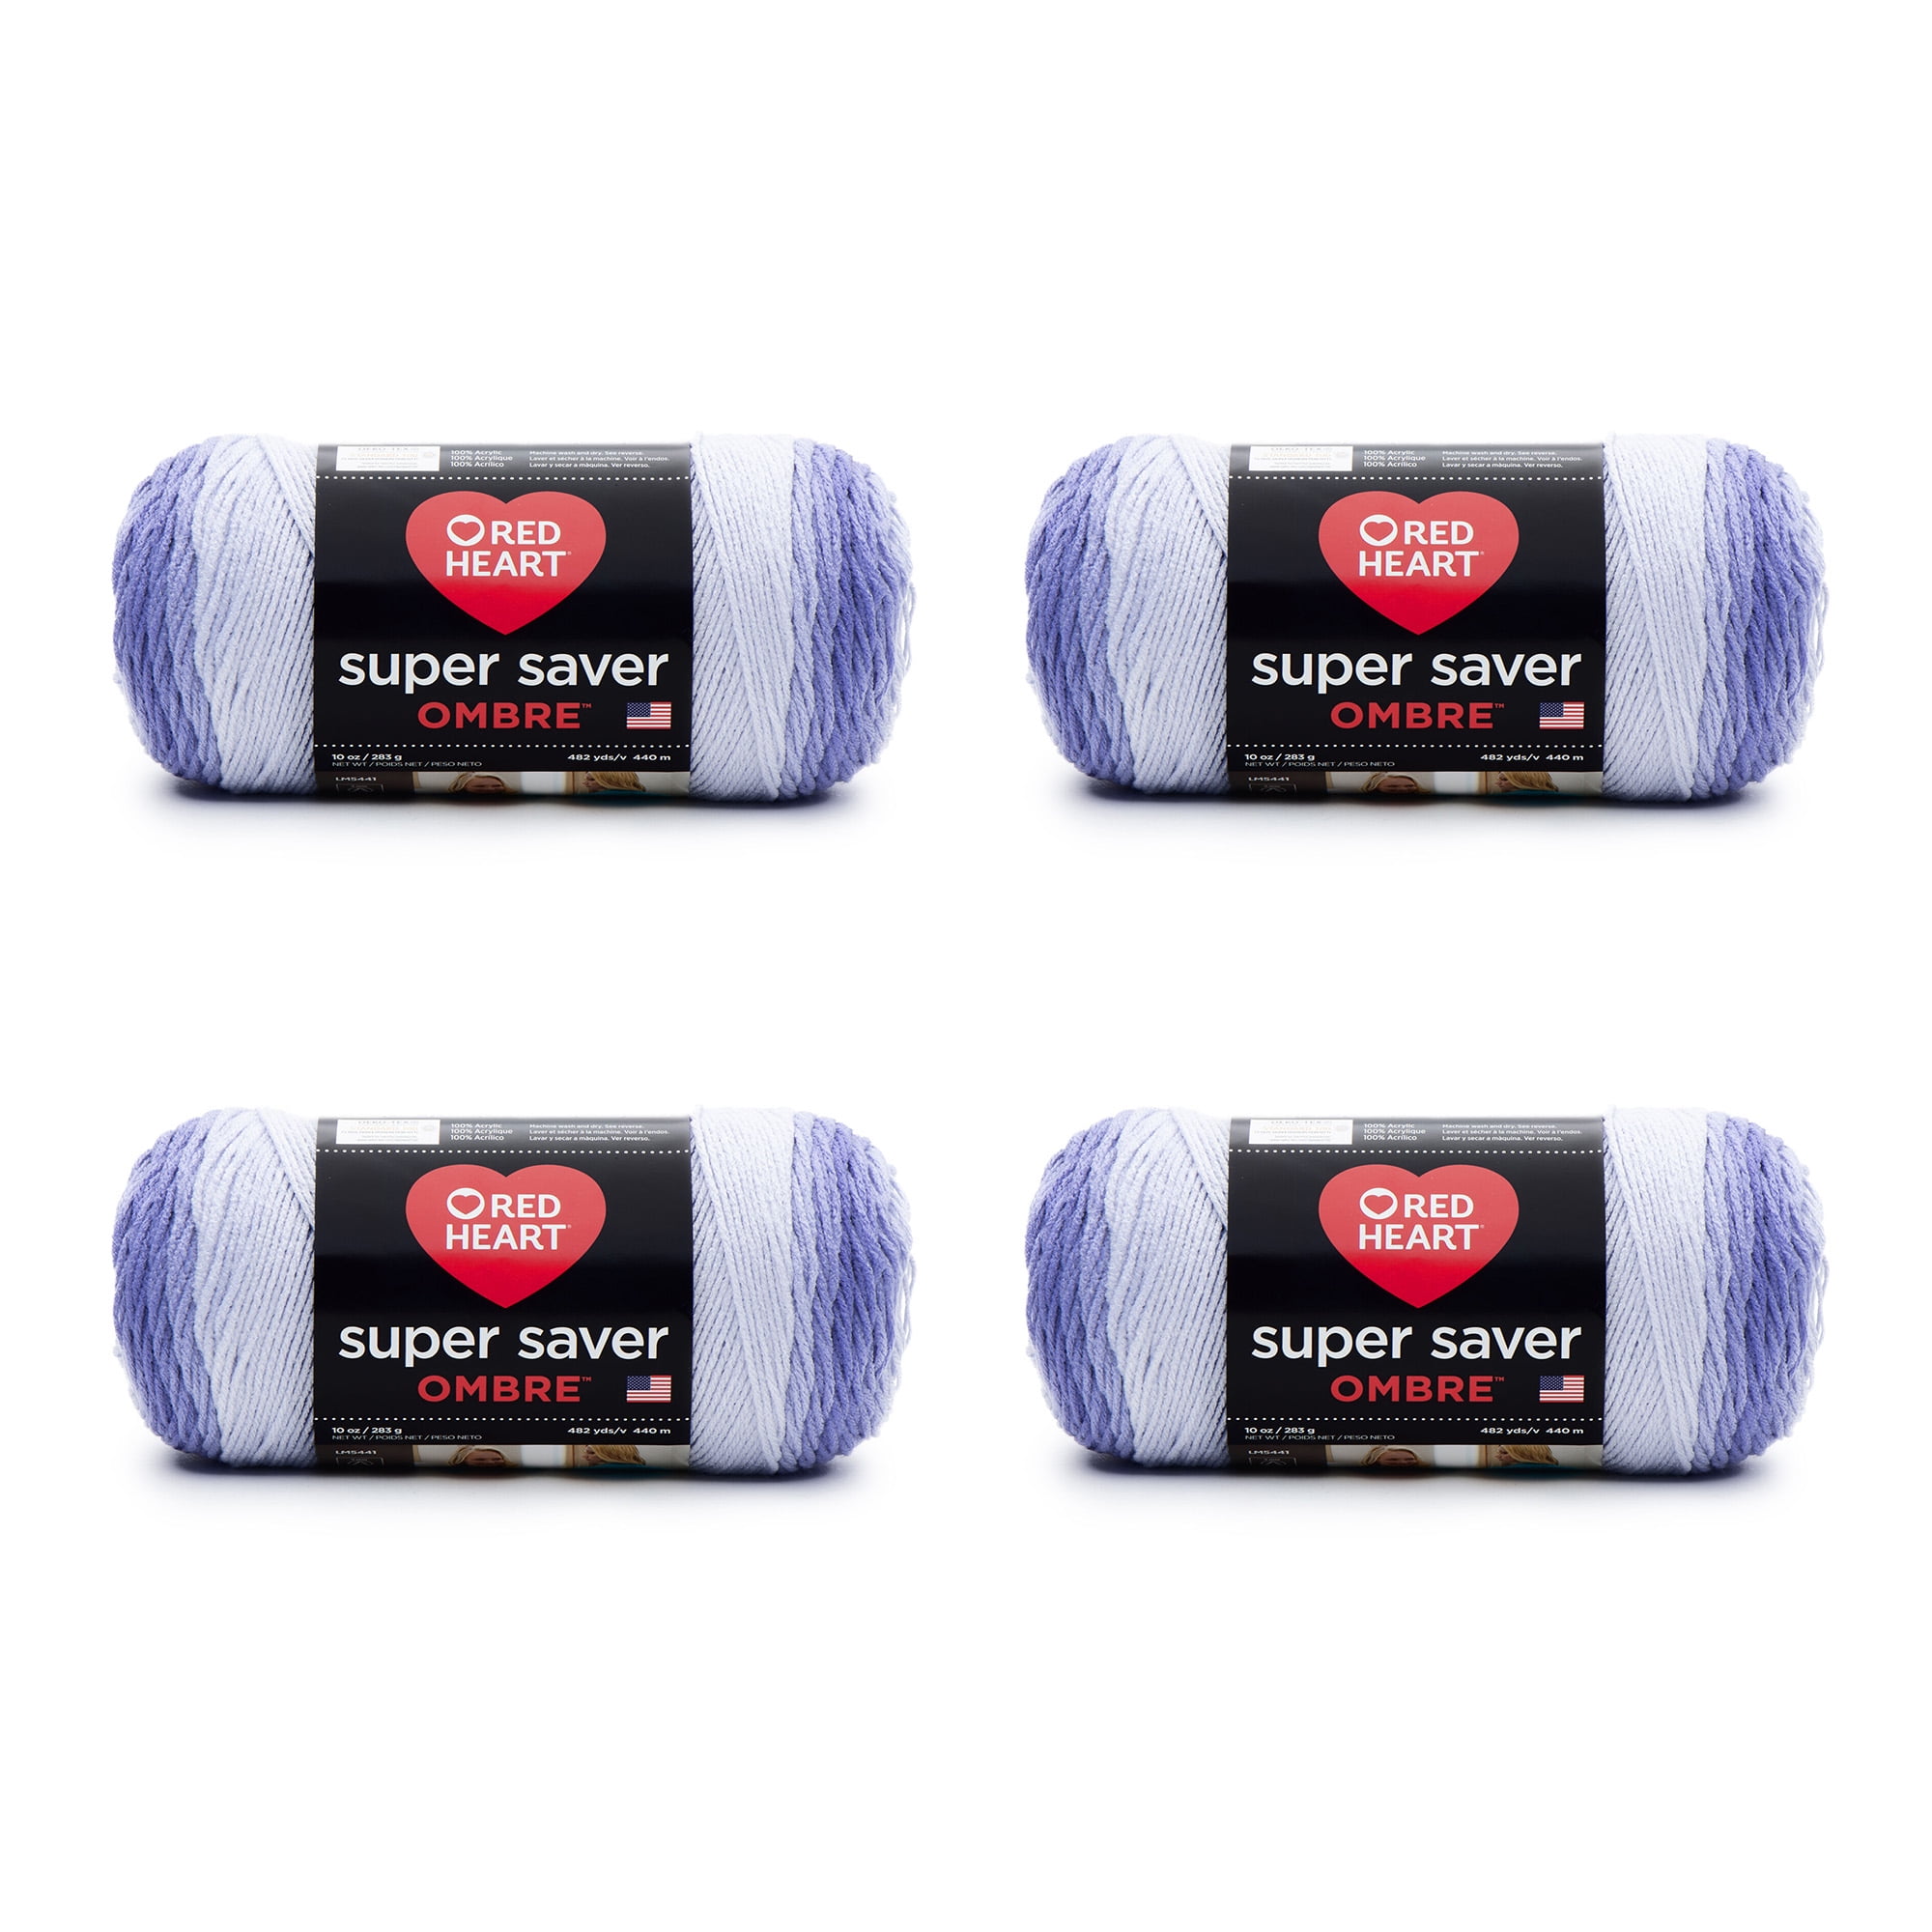 Red Heart Super Saver Ombre Yarn-True Blue, Multipack Of 2